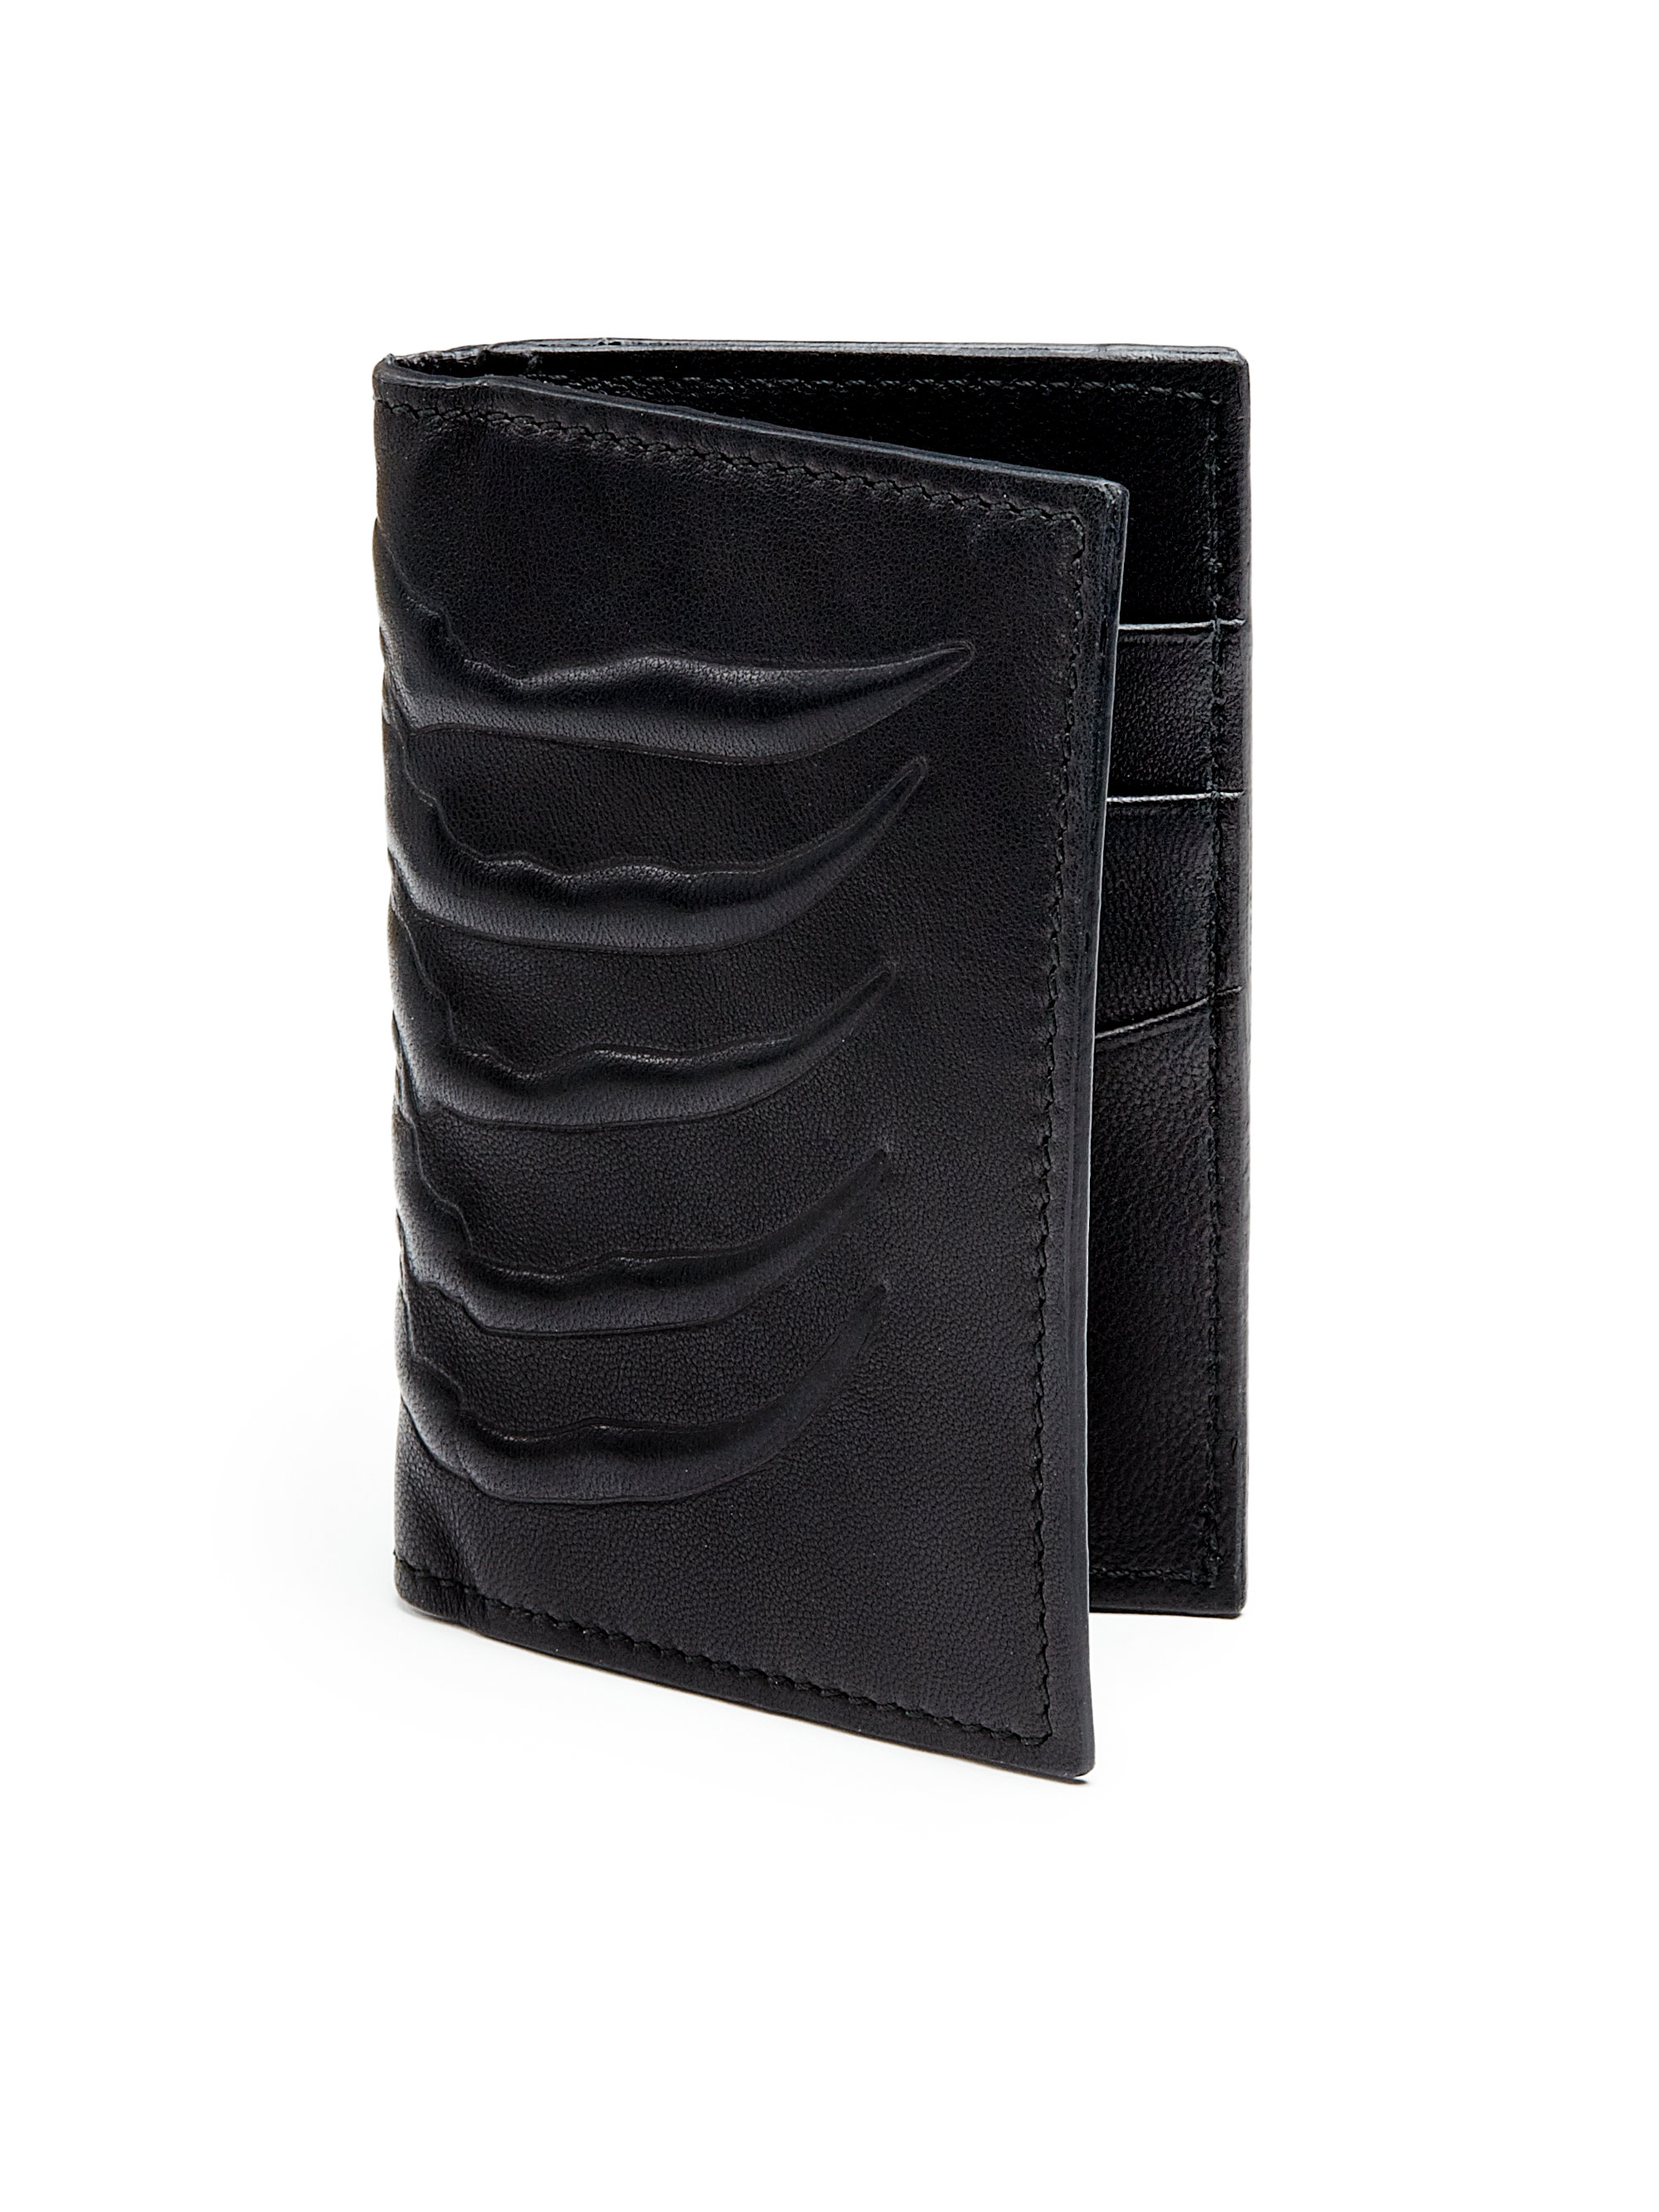 Alexander mcqueen Rib Cage Leather Card Holder in Black for Men | Lyst